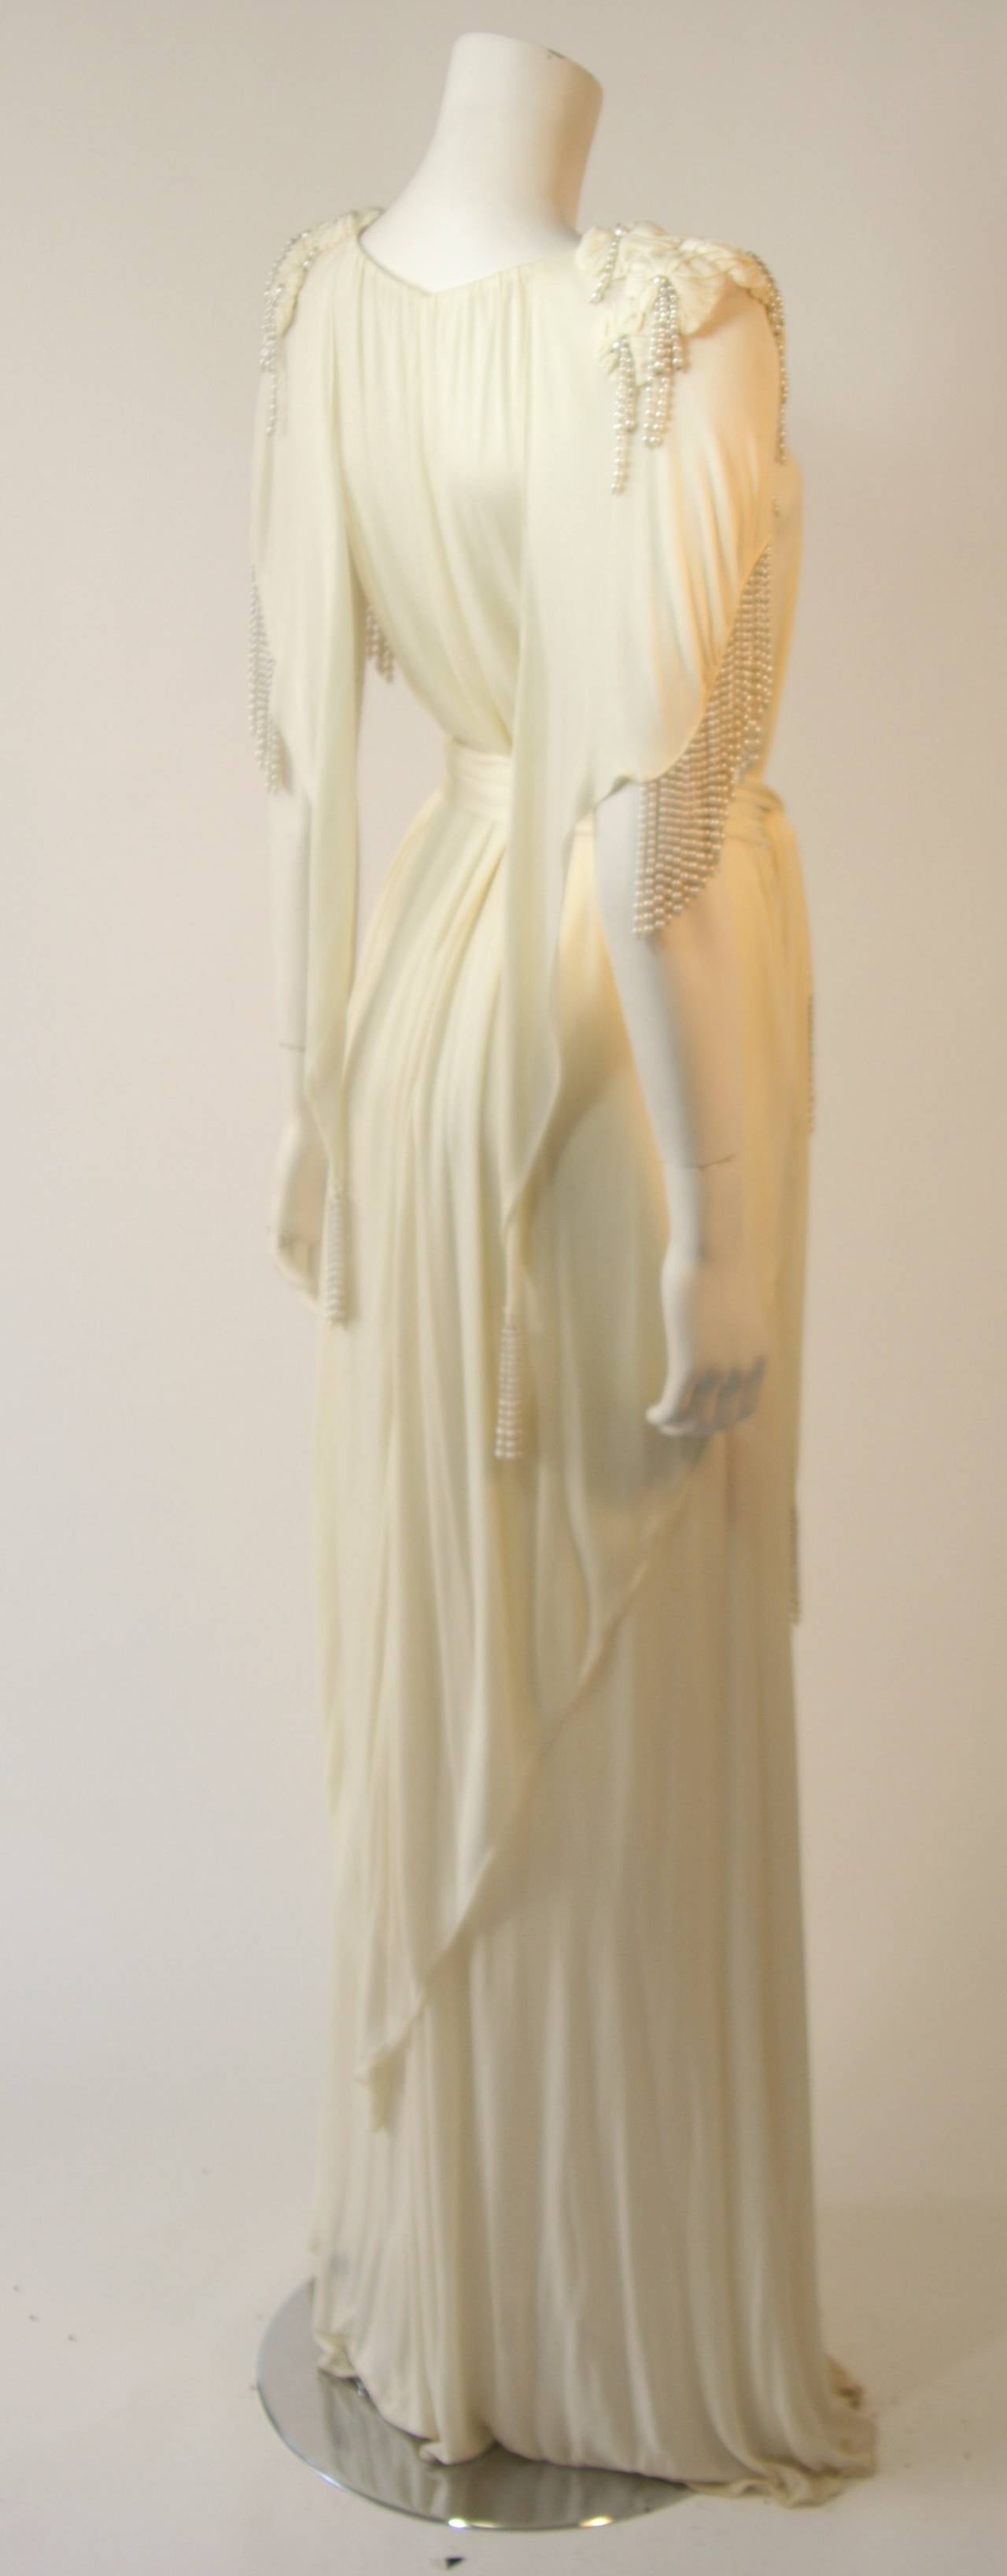 Holly's Harp Off White Jersey Gown with Pearls 3